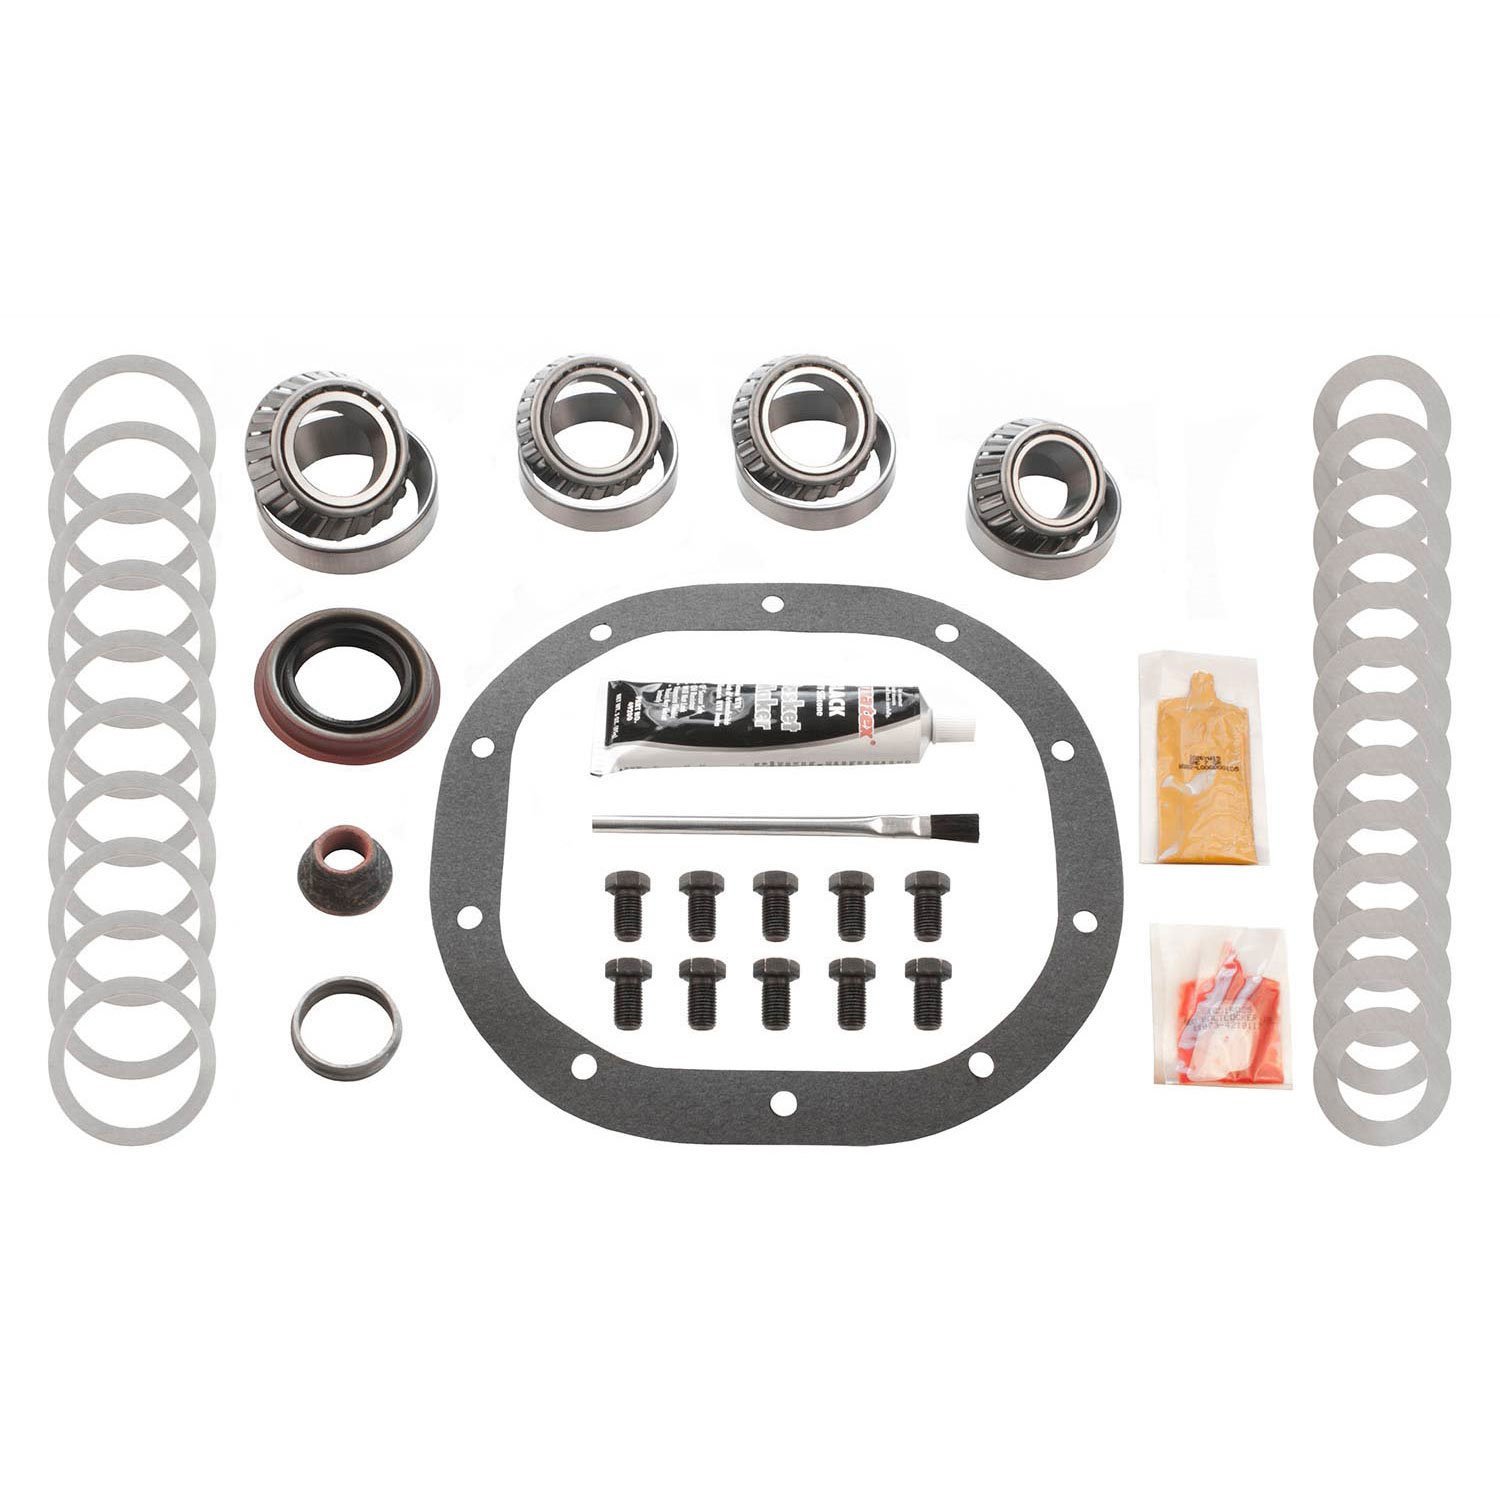 Master Installation Kit 1975-2011 Ford 7.5" Includes: